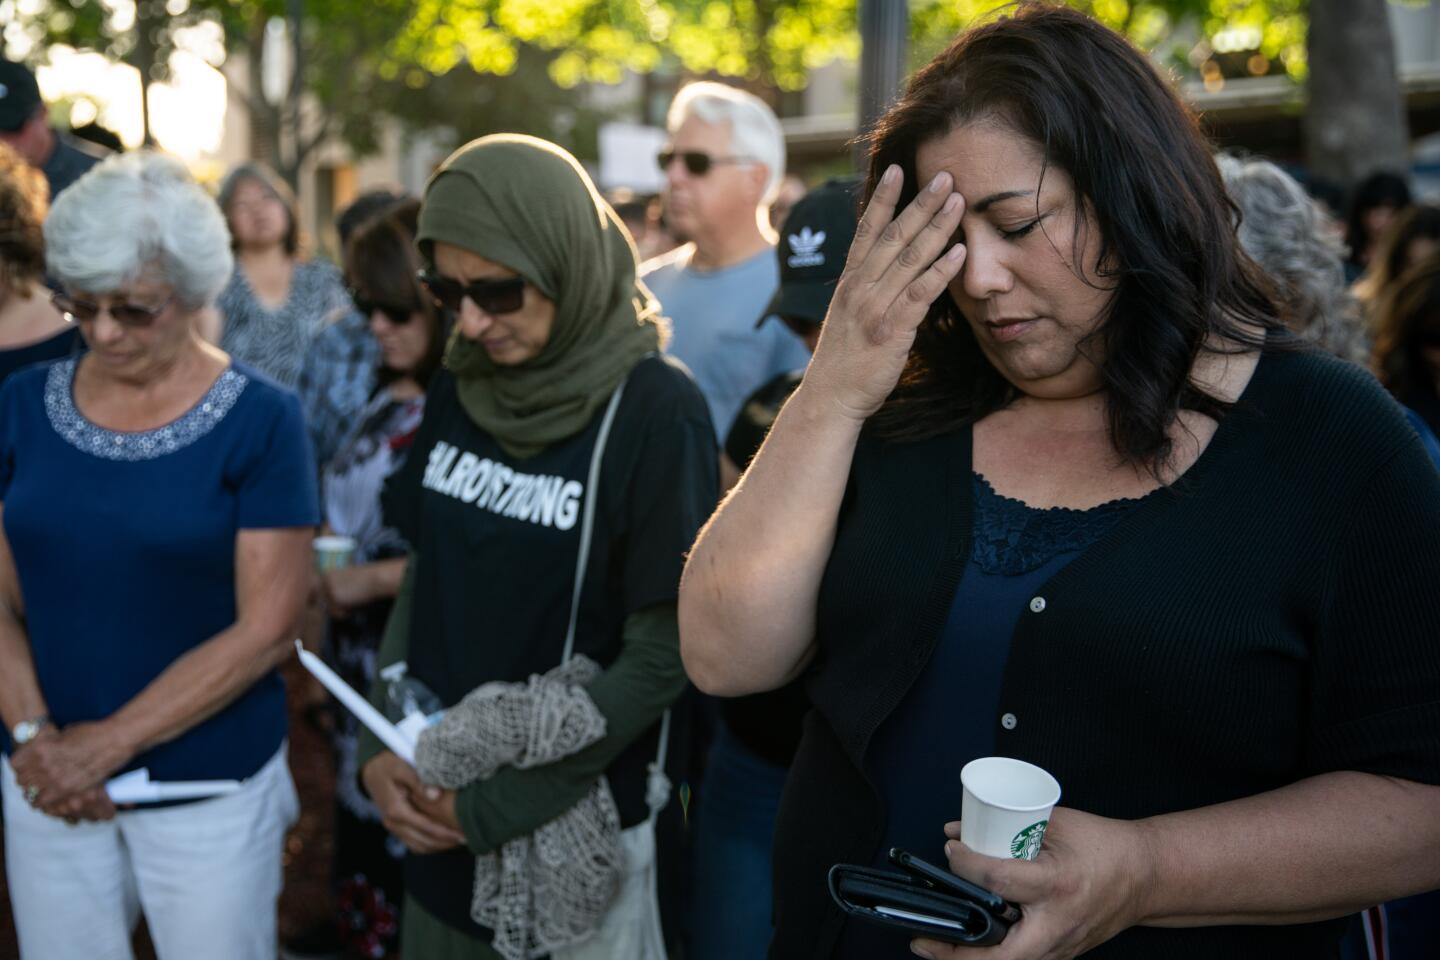 Susan Meyers, Noshaba Afzal and Andrea Nicolette, all of Gilroy, bow their heads during a candlelight vigil at Gilroy City Hall on Monday.